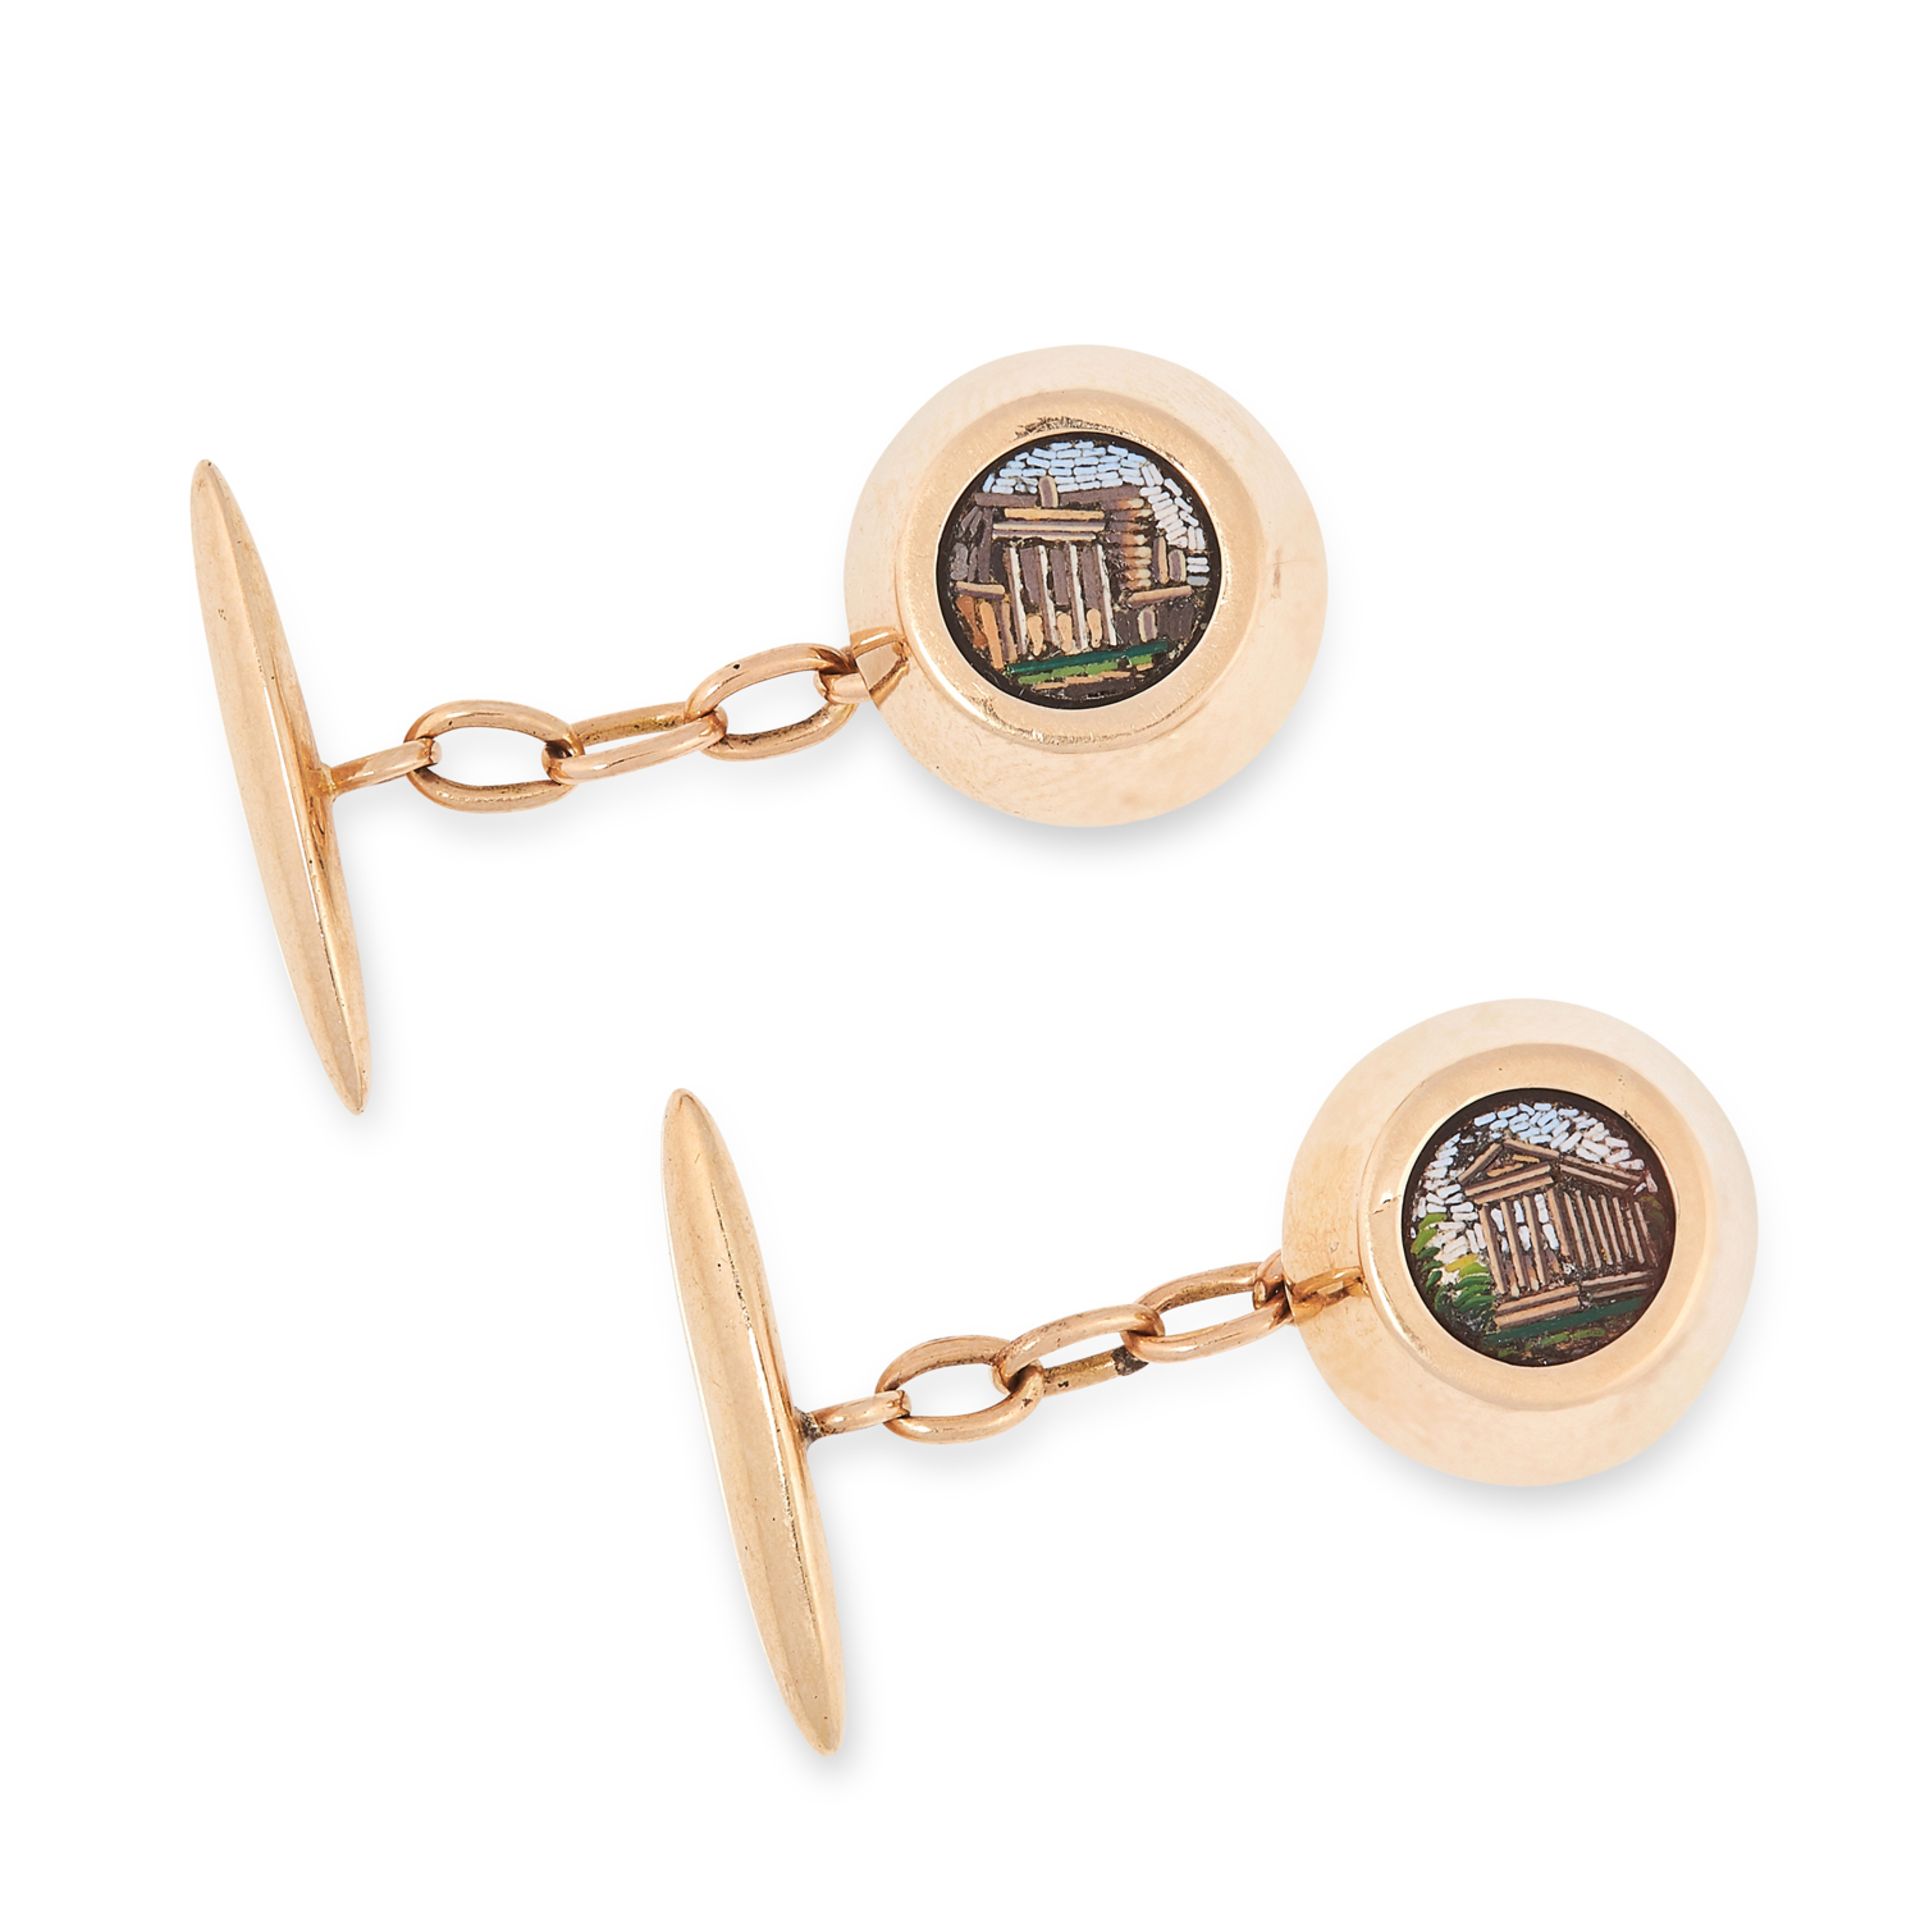 A PAIR OF ANTIQUE MICROMOSAIC CUFFLINKS each set with a micromosaic scene of a Grecian building